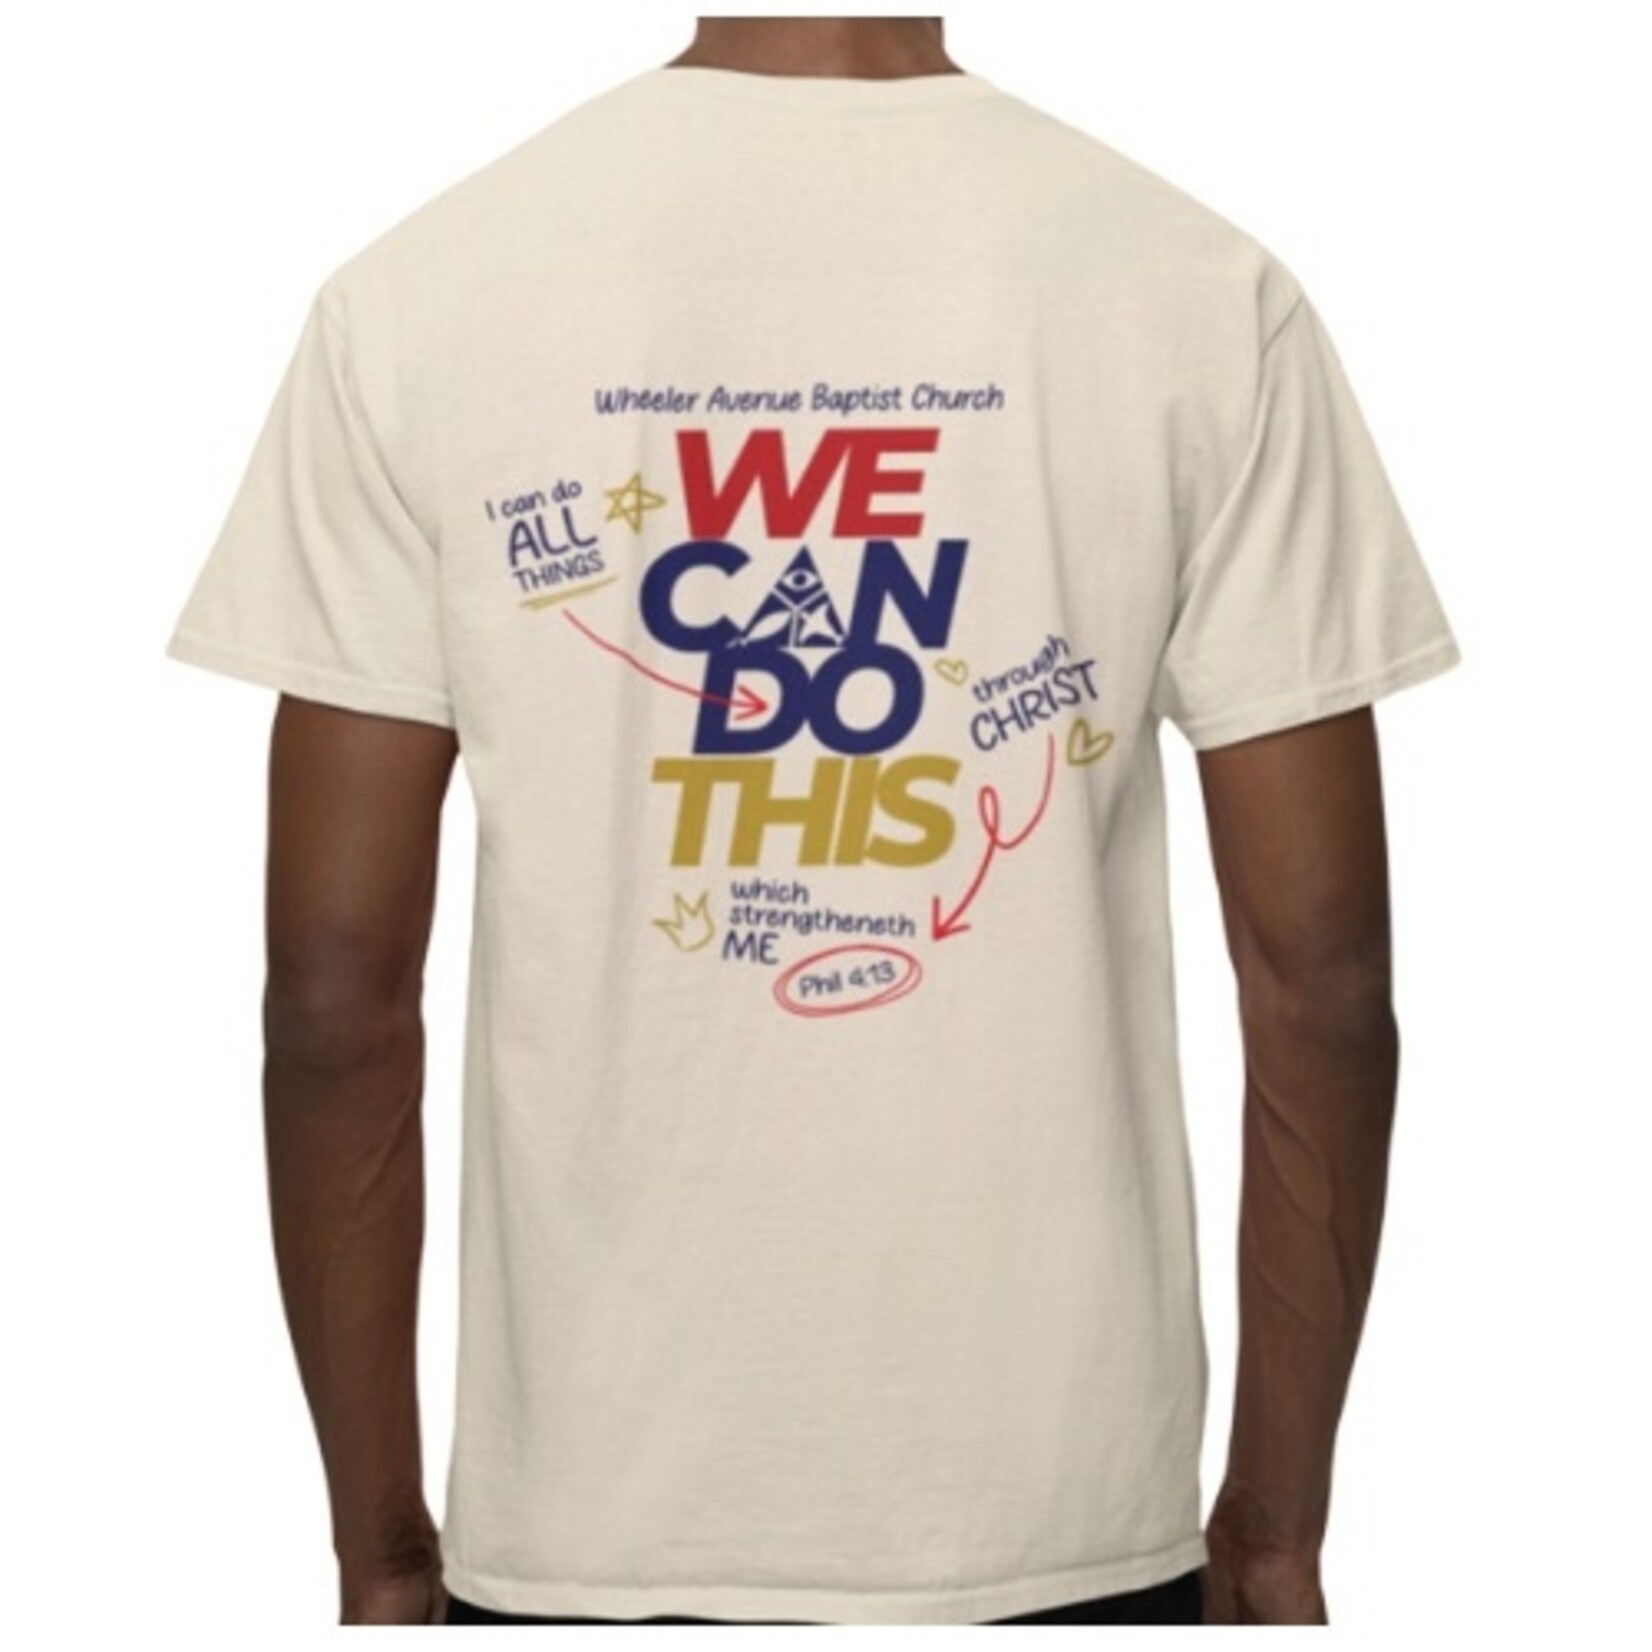 WE CAN DO THIS T-SHIRT